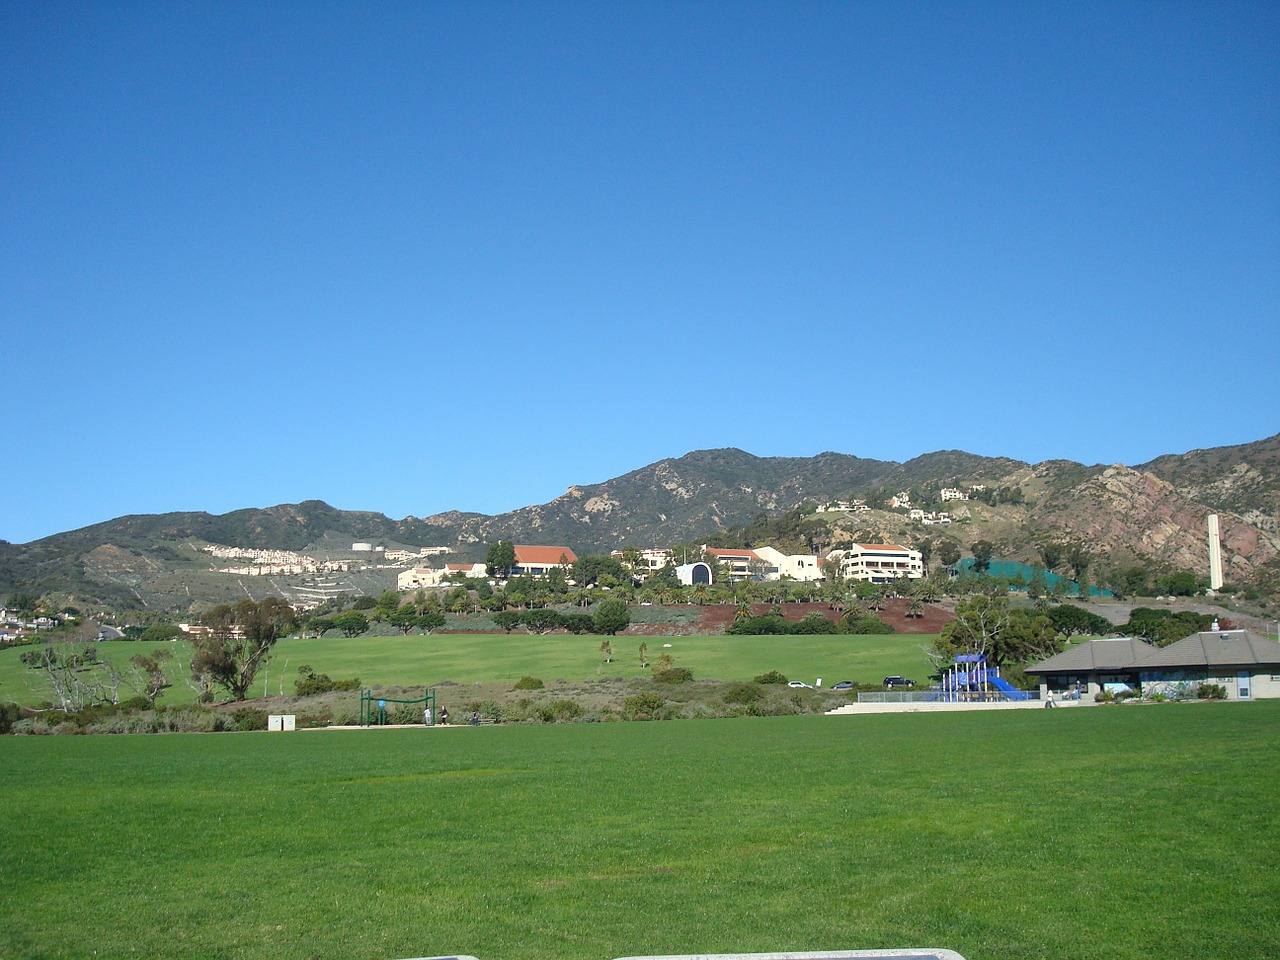 park and mountains at malibu bluffs park los angeles